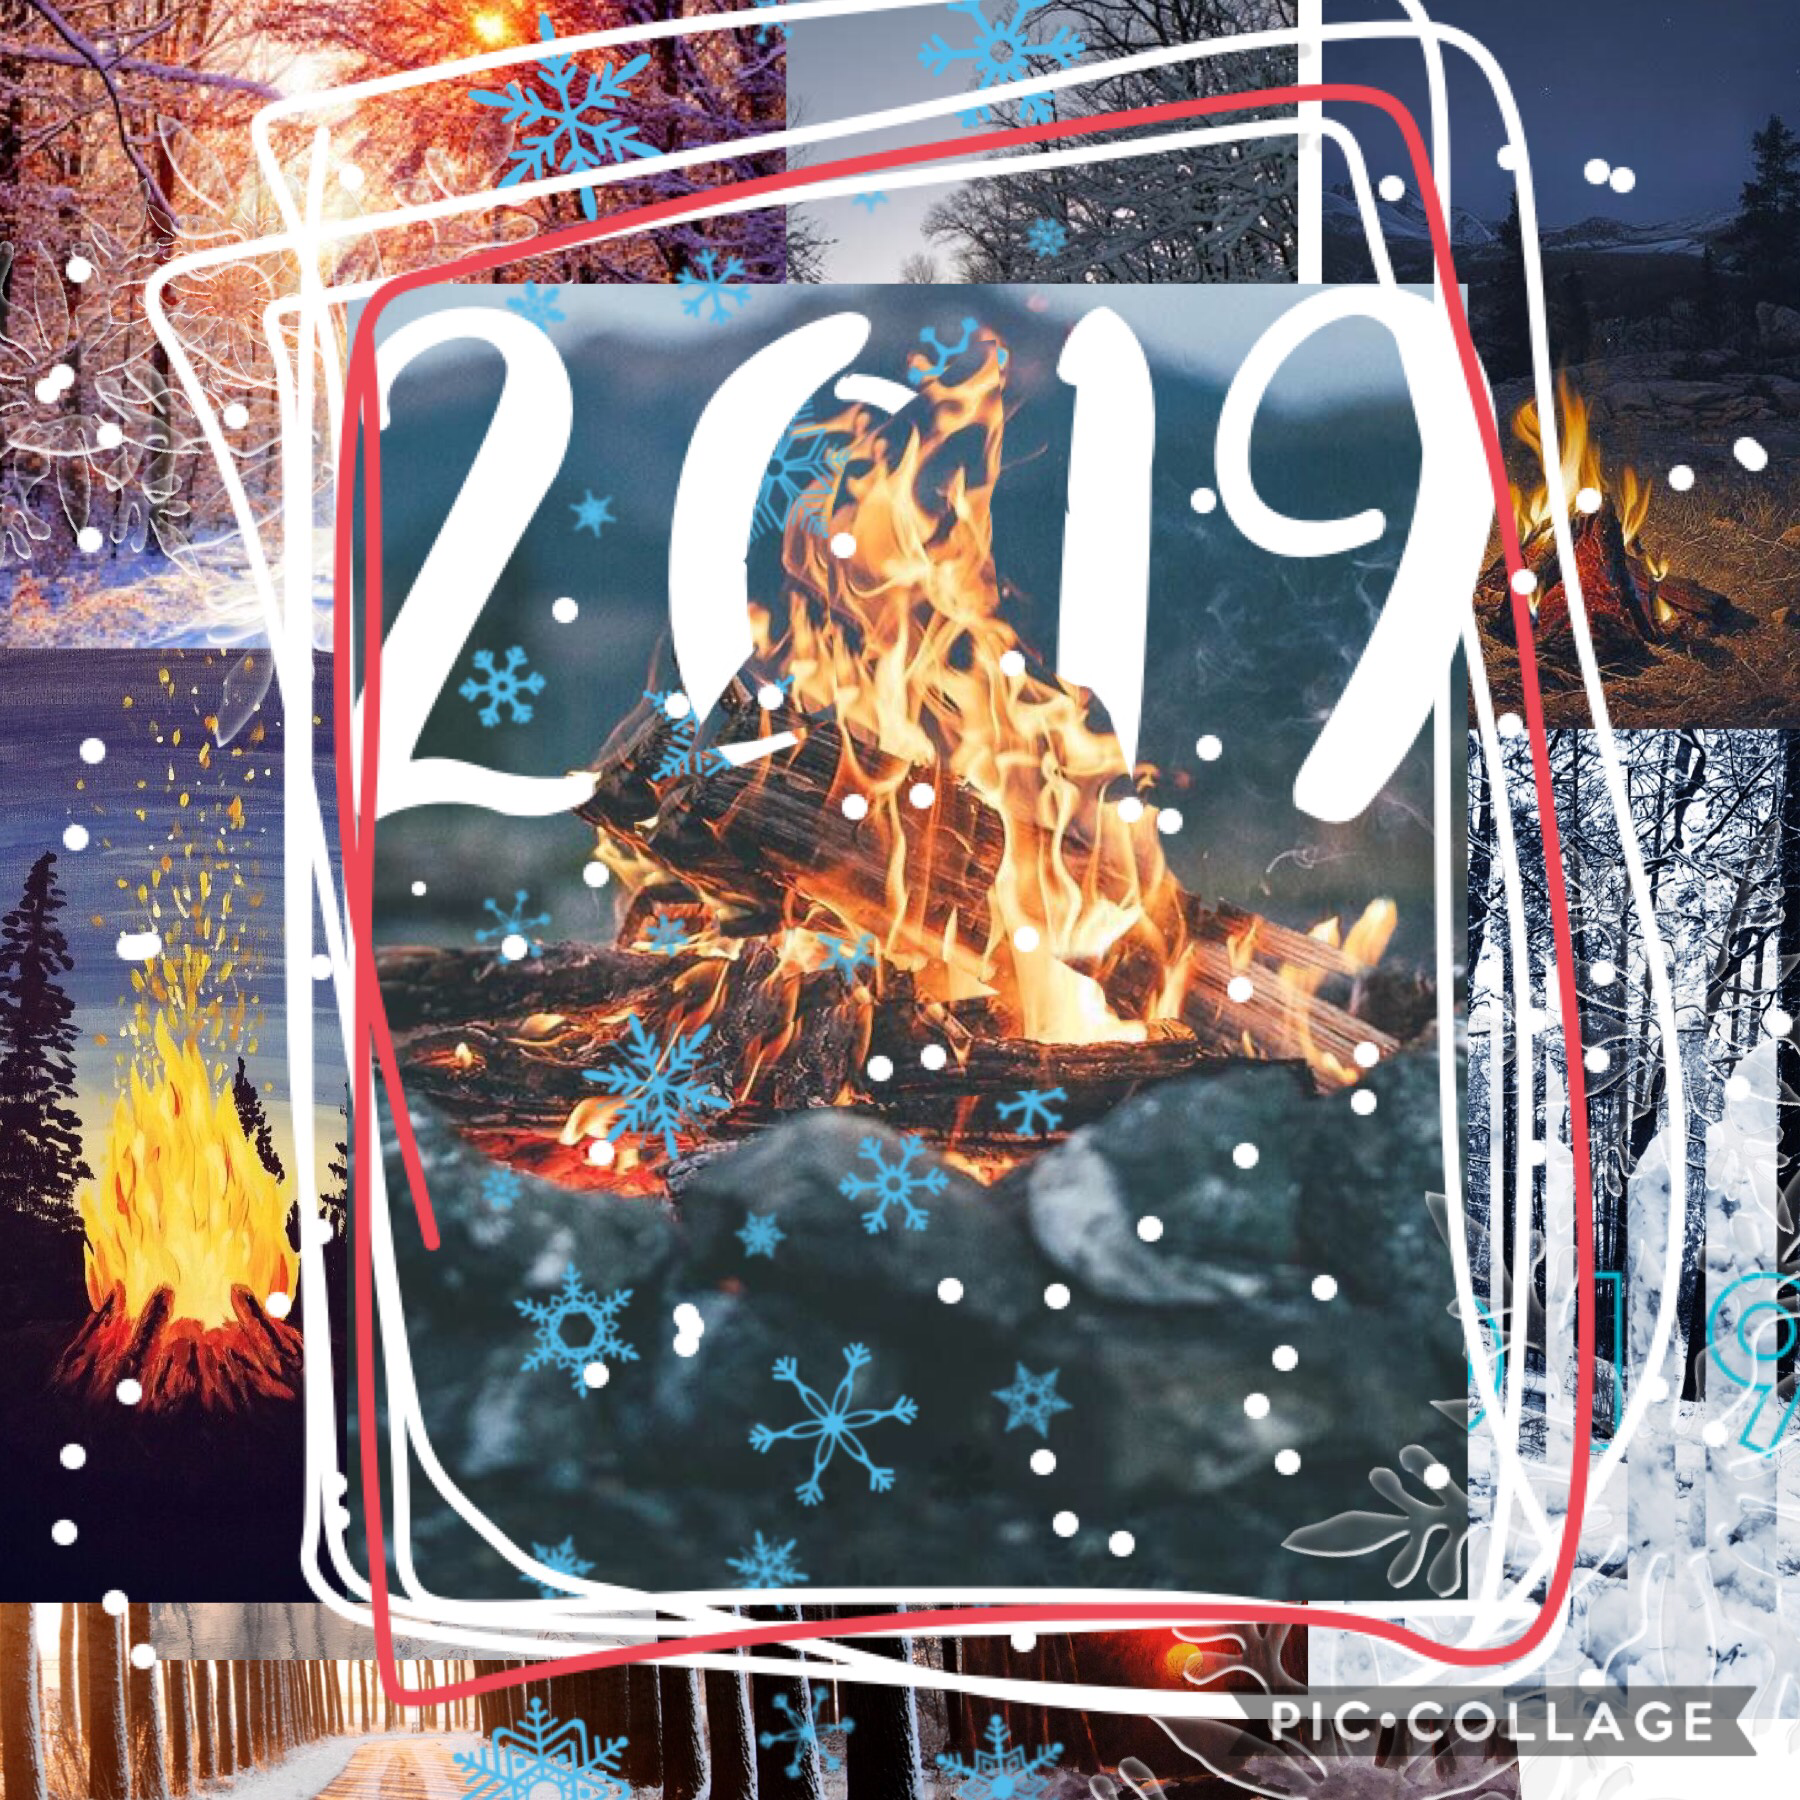 Wishing everyone well for 2019!!!